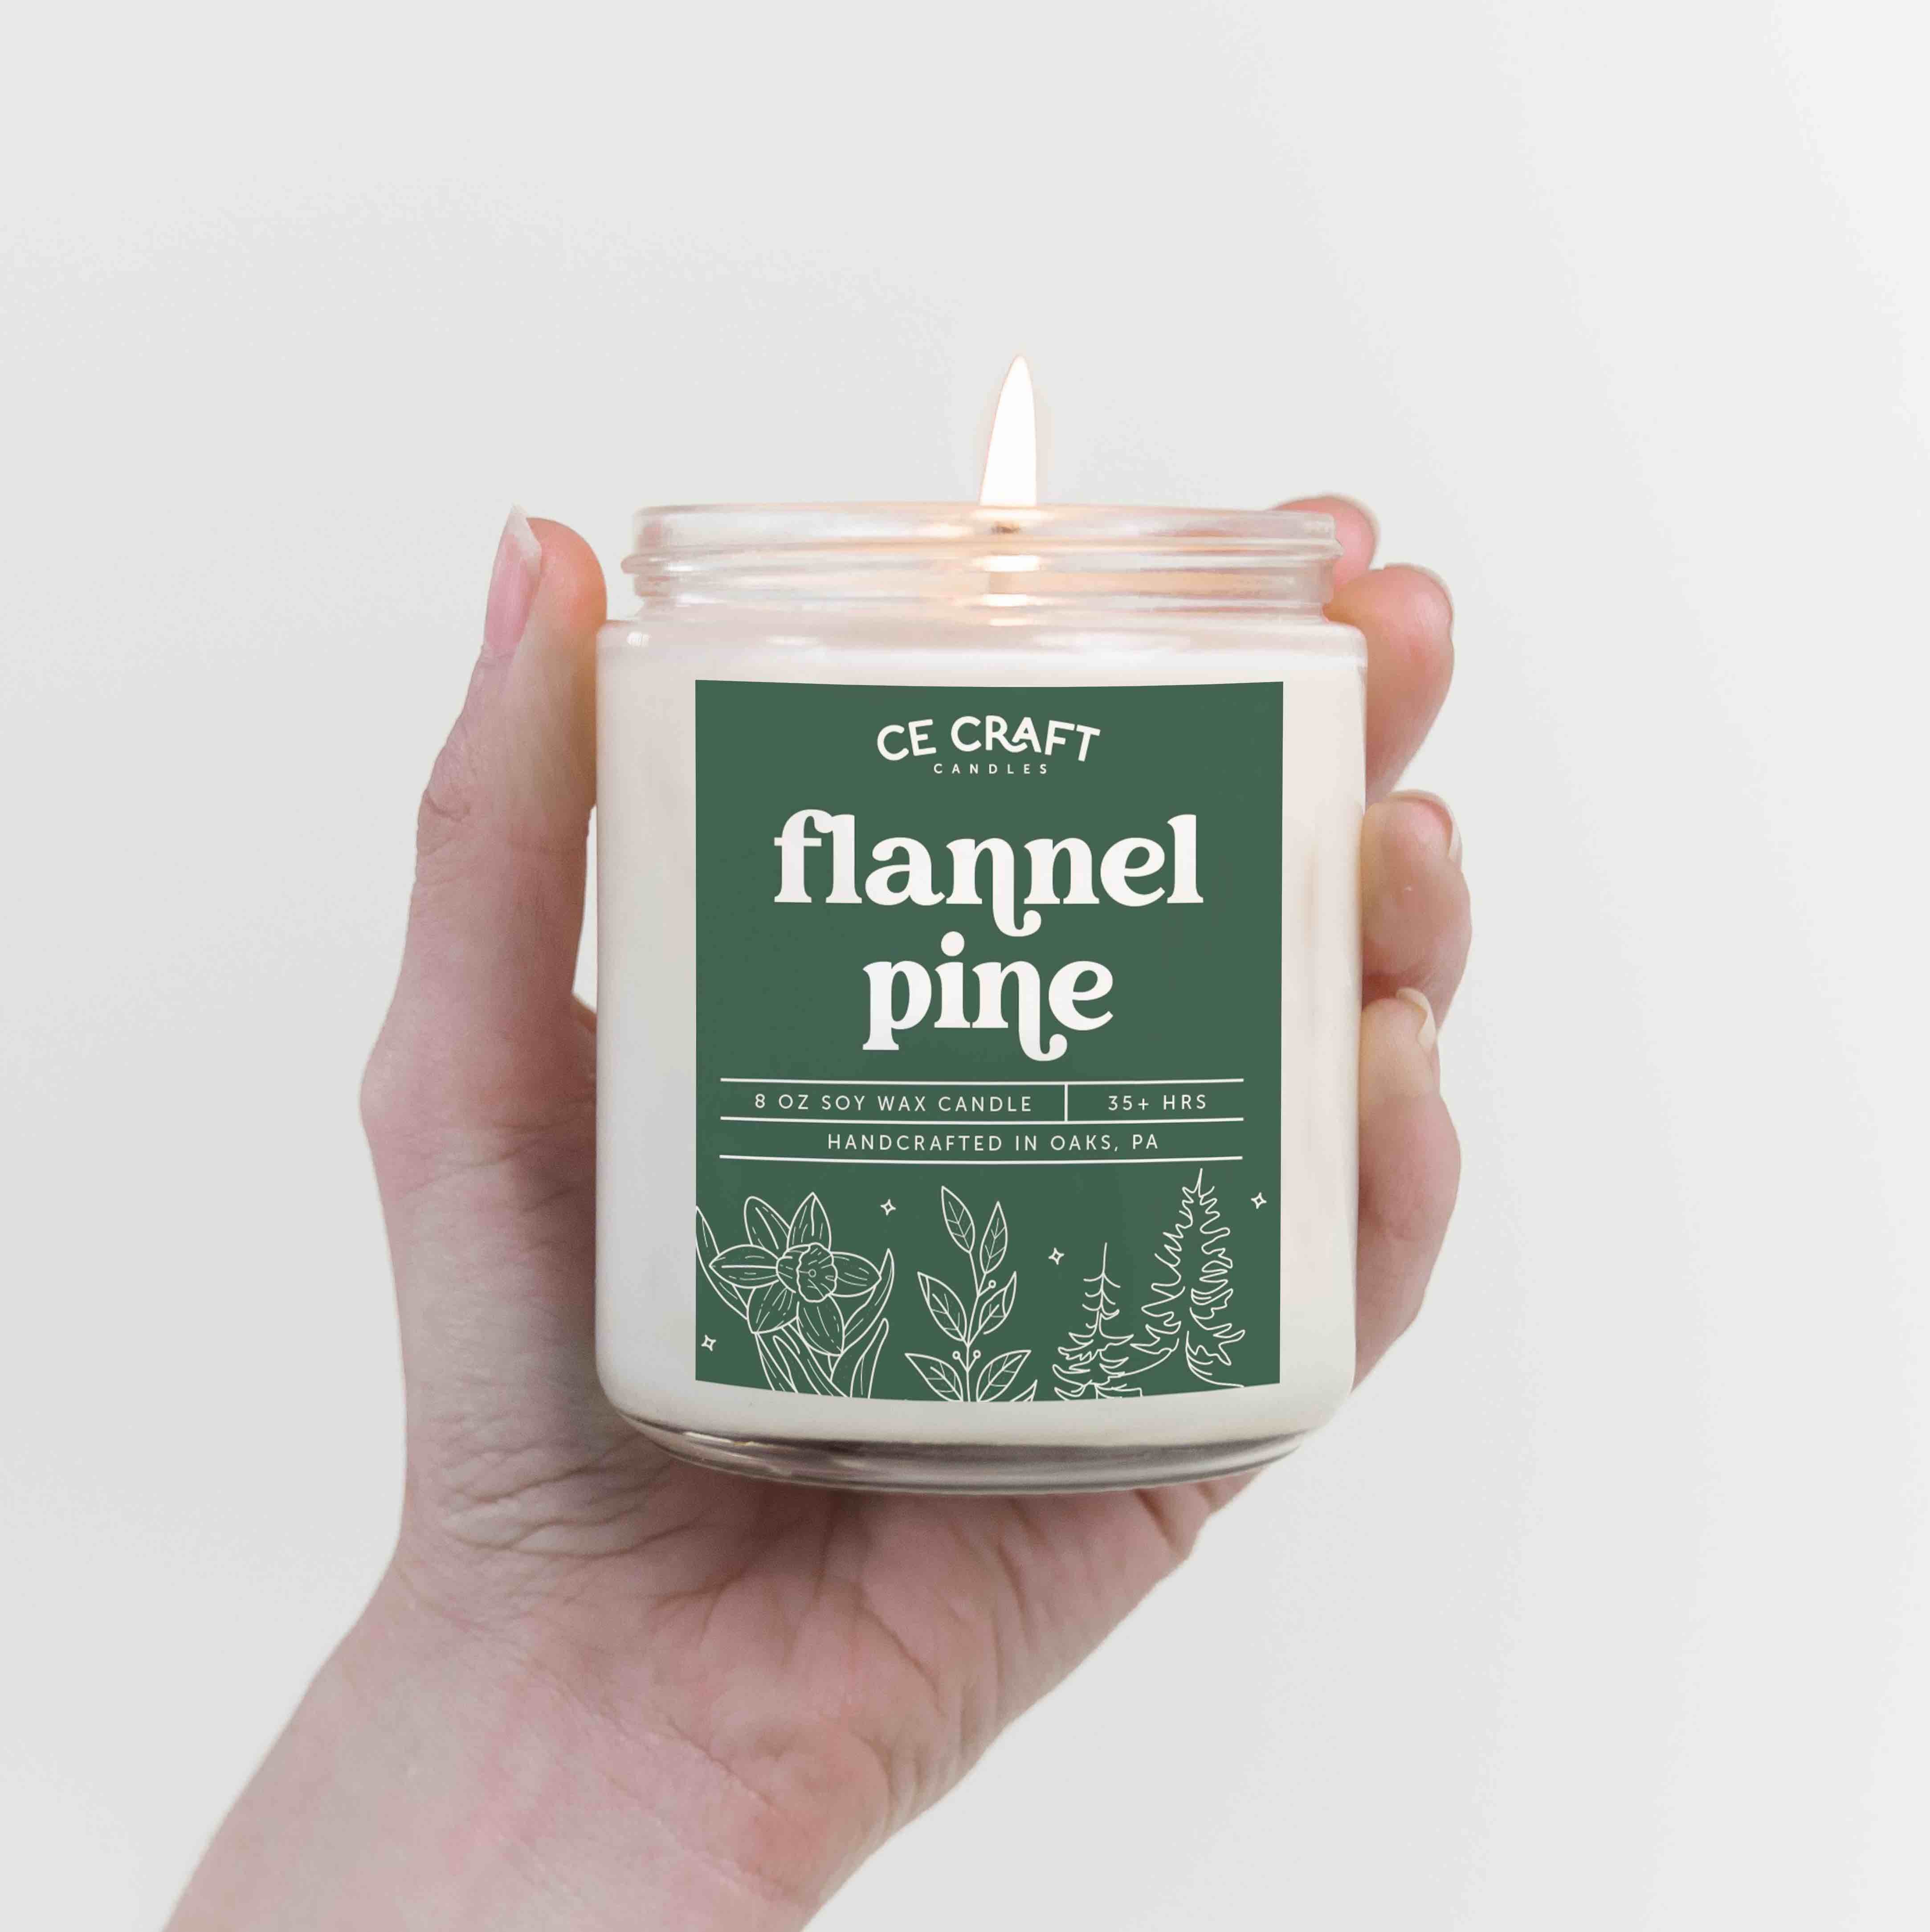 Flannel Pine Scented Candle